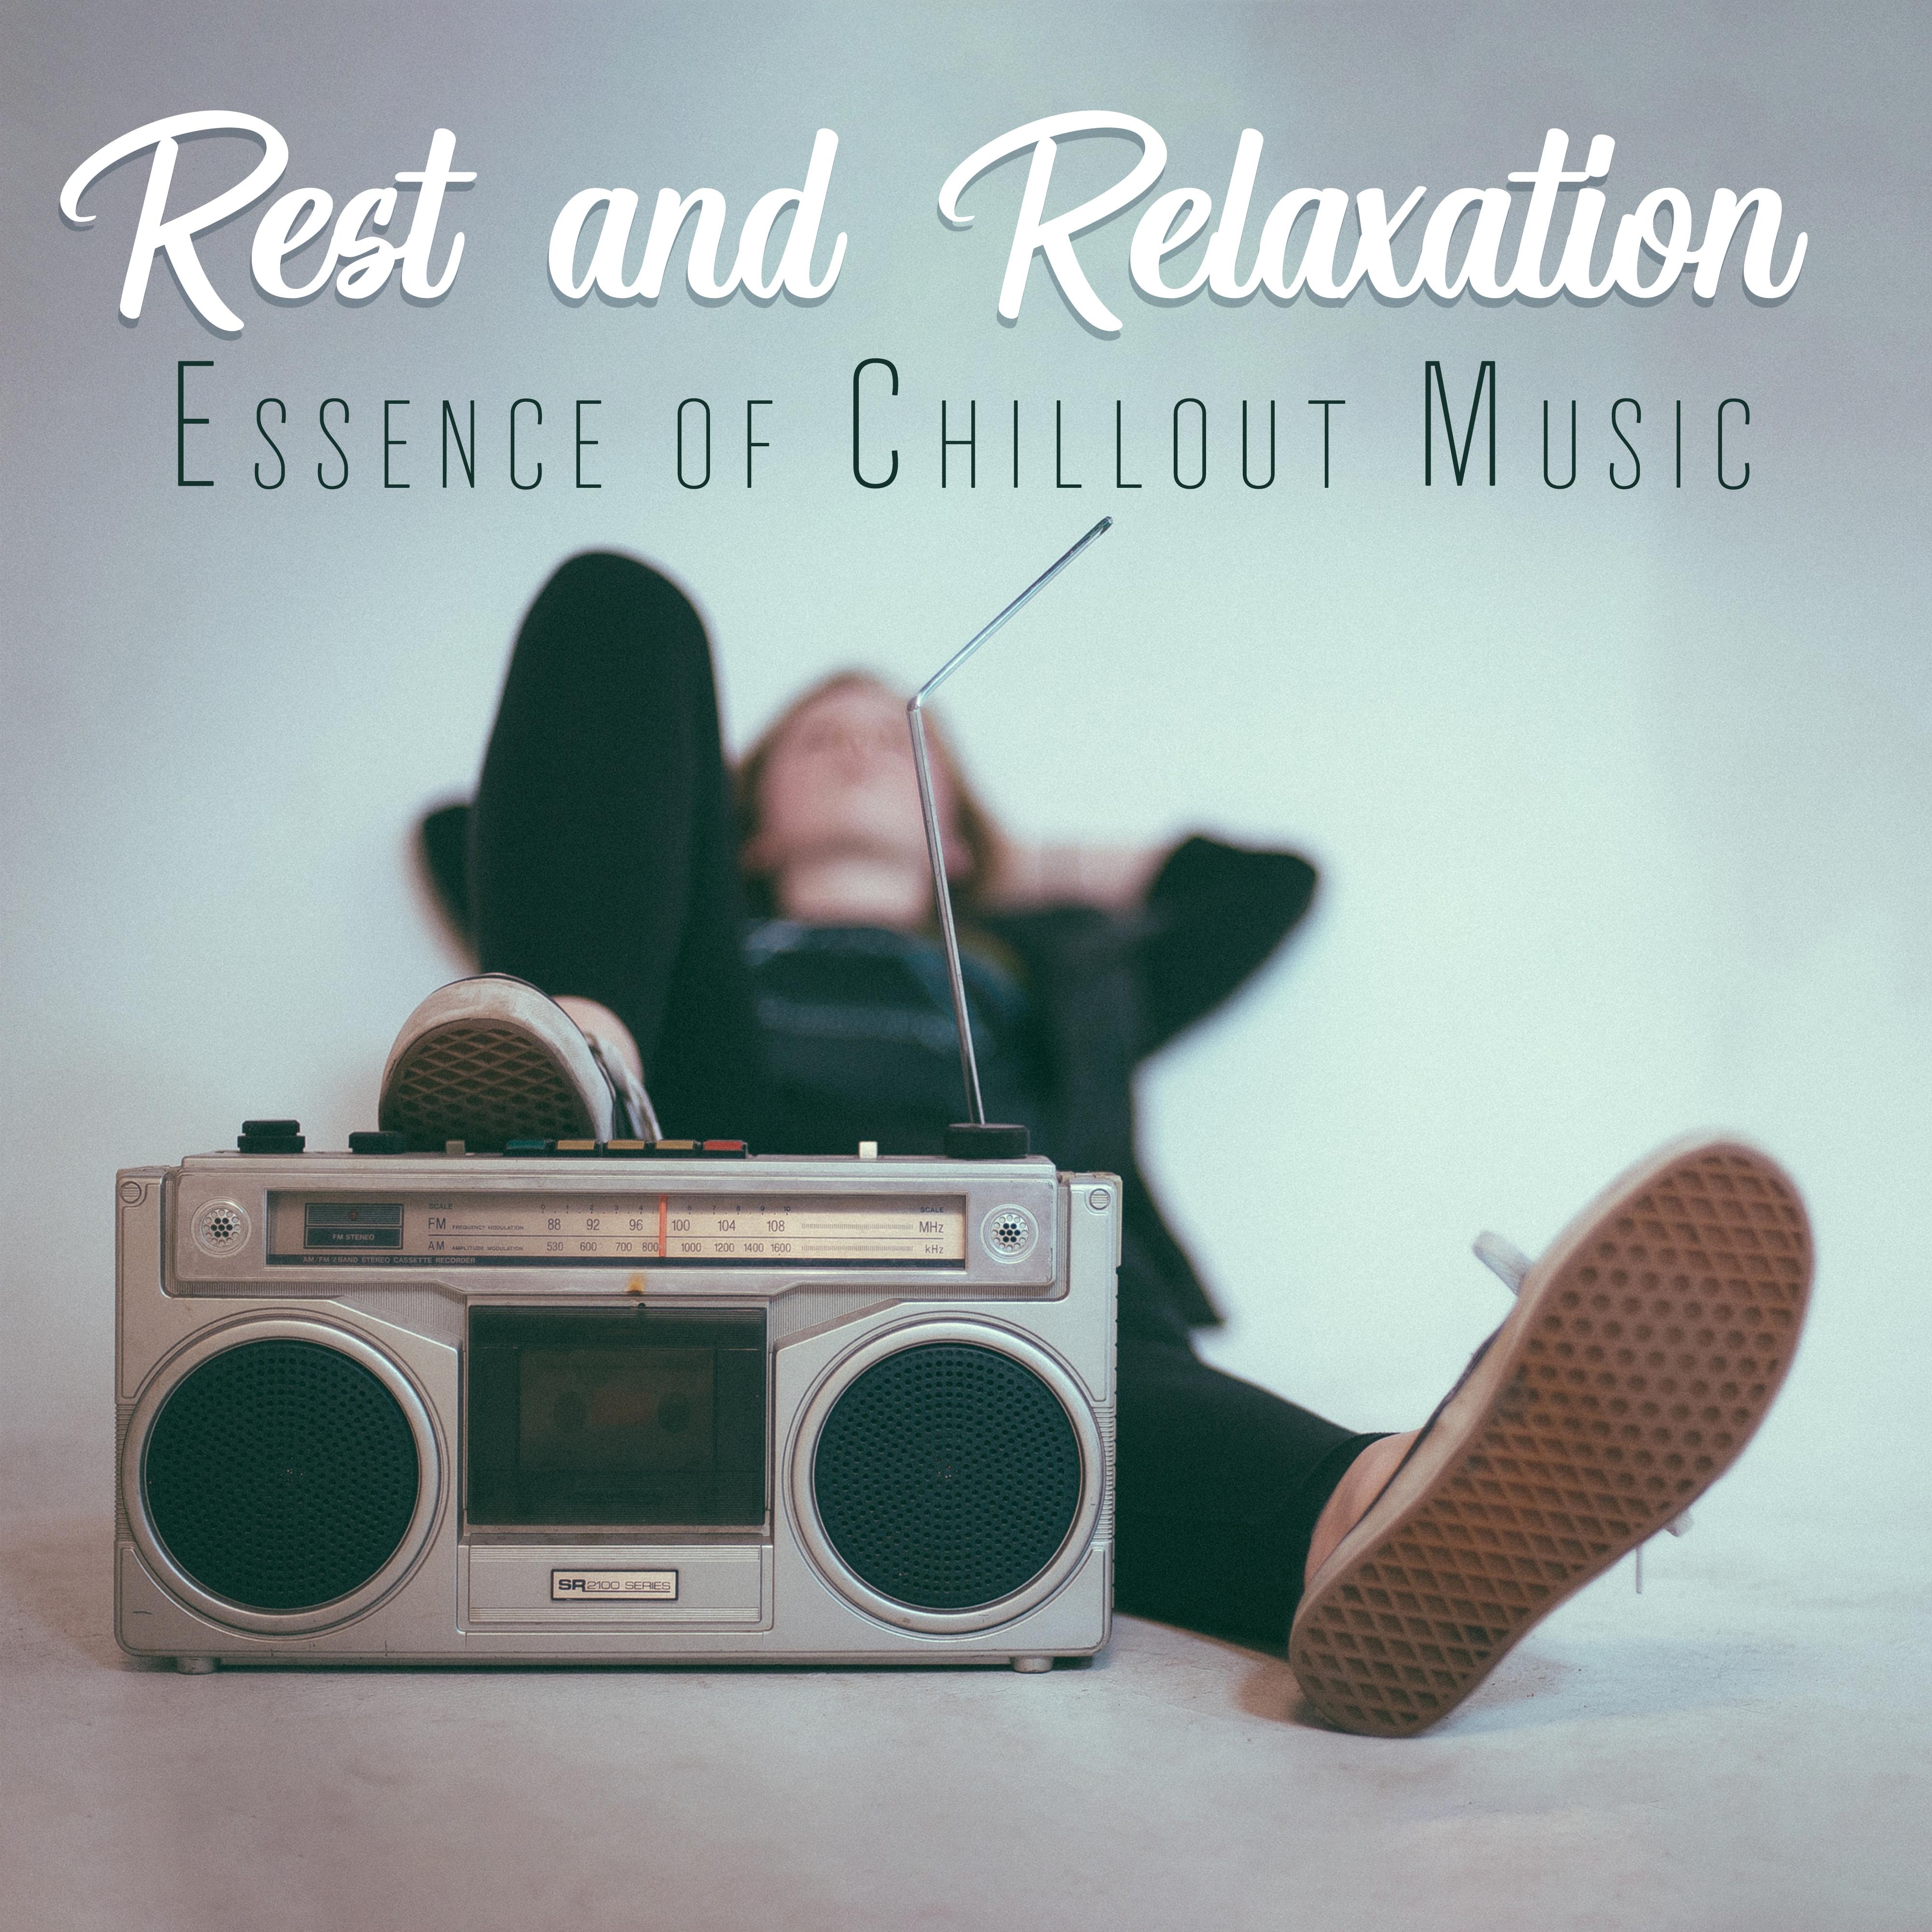 Rest and Relaxation: Essence of Chillout Music